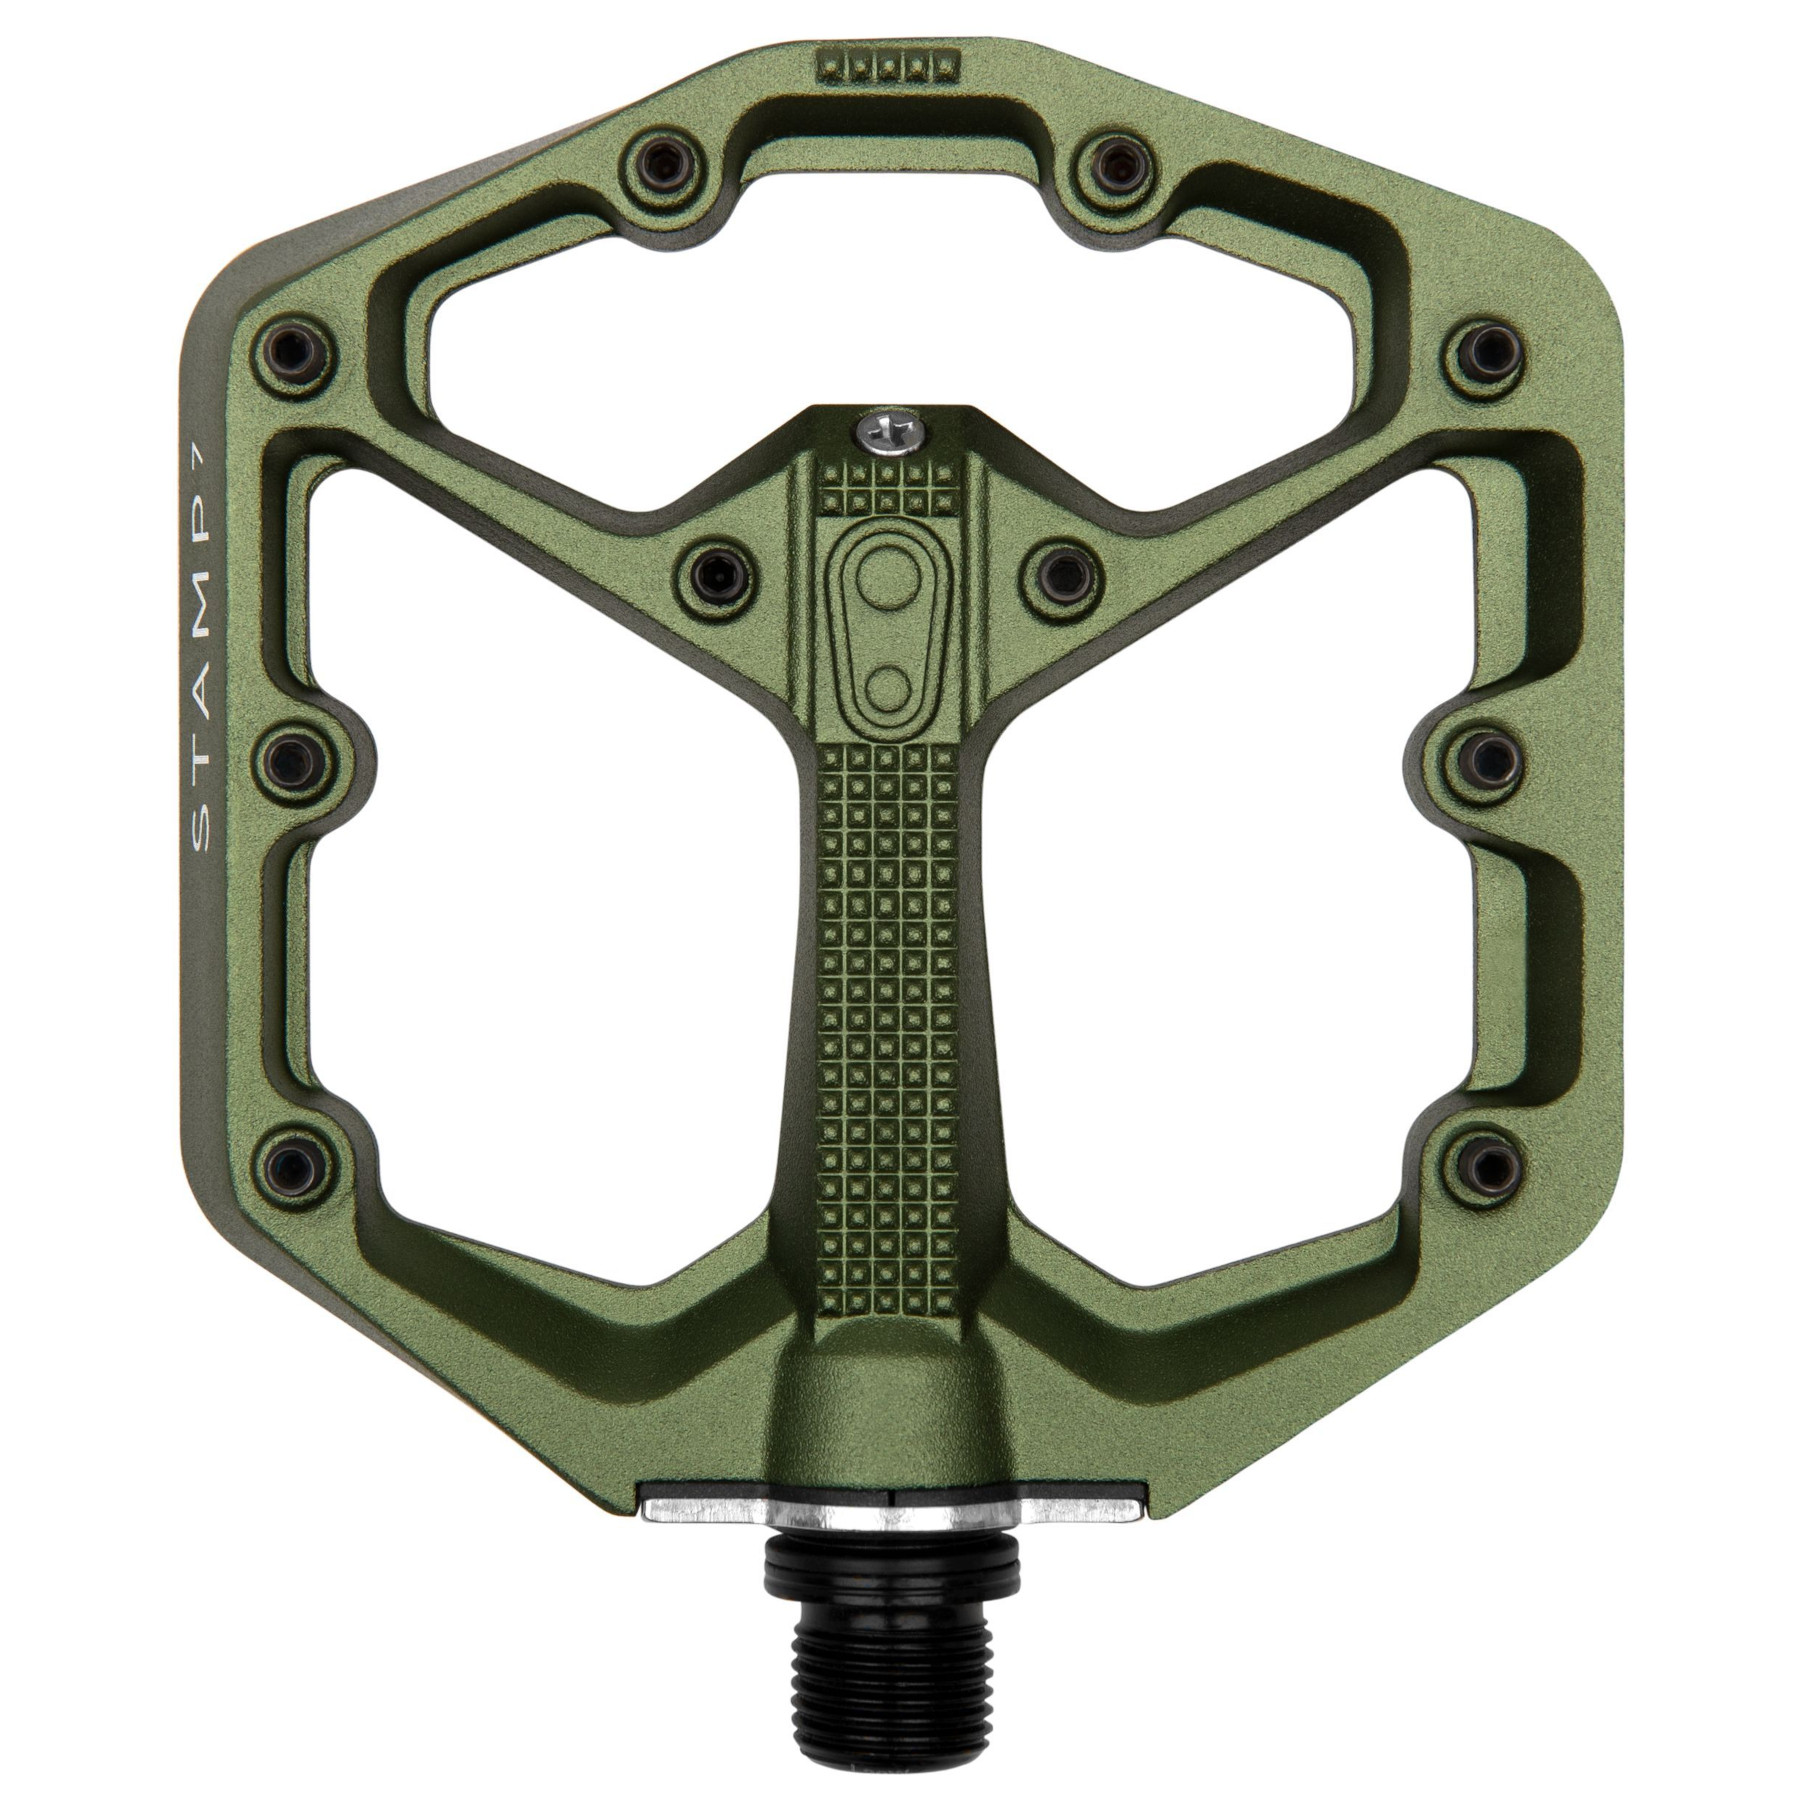 Productfoto van Crankbrothers Stamp 7 Small Platformpedalen - Camo Limited Collection - camo green